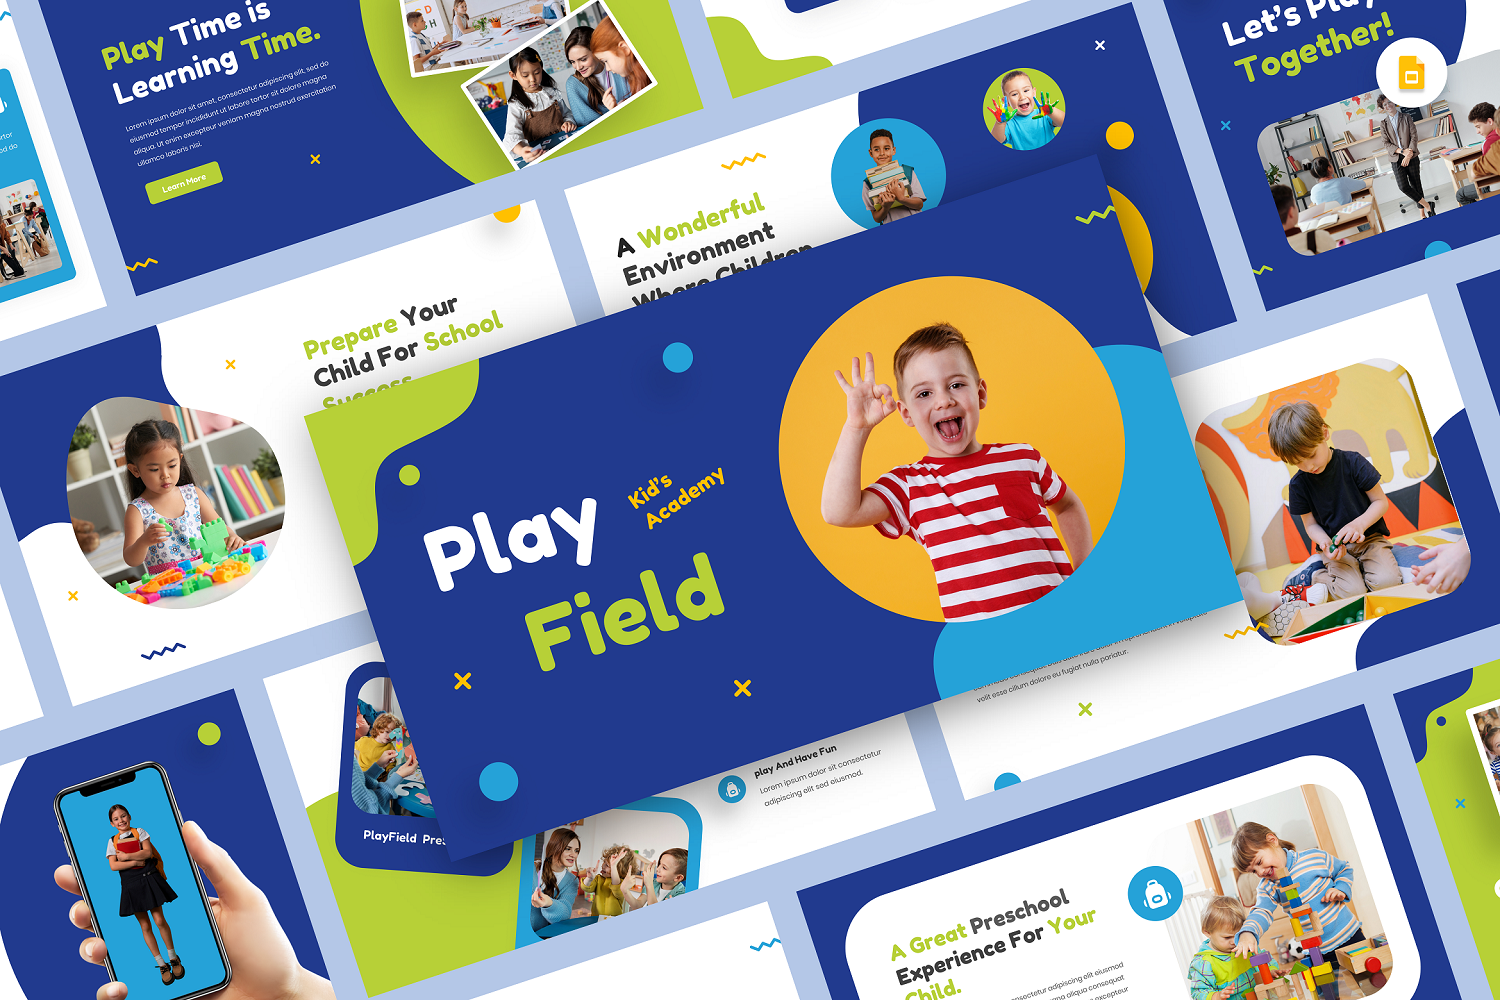 Template #344551 Primary School Webdesign Template - Logo template Preview